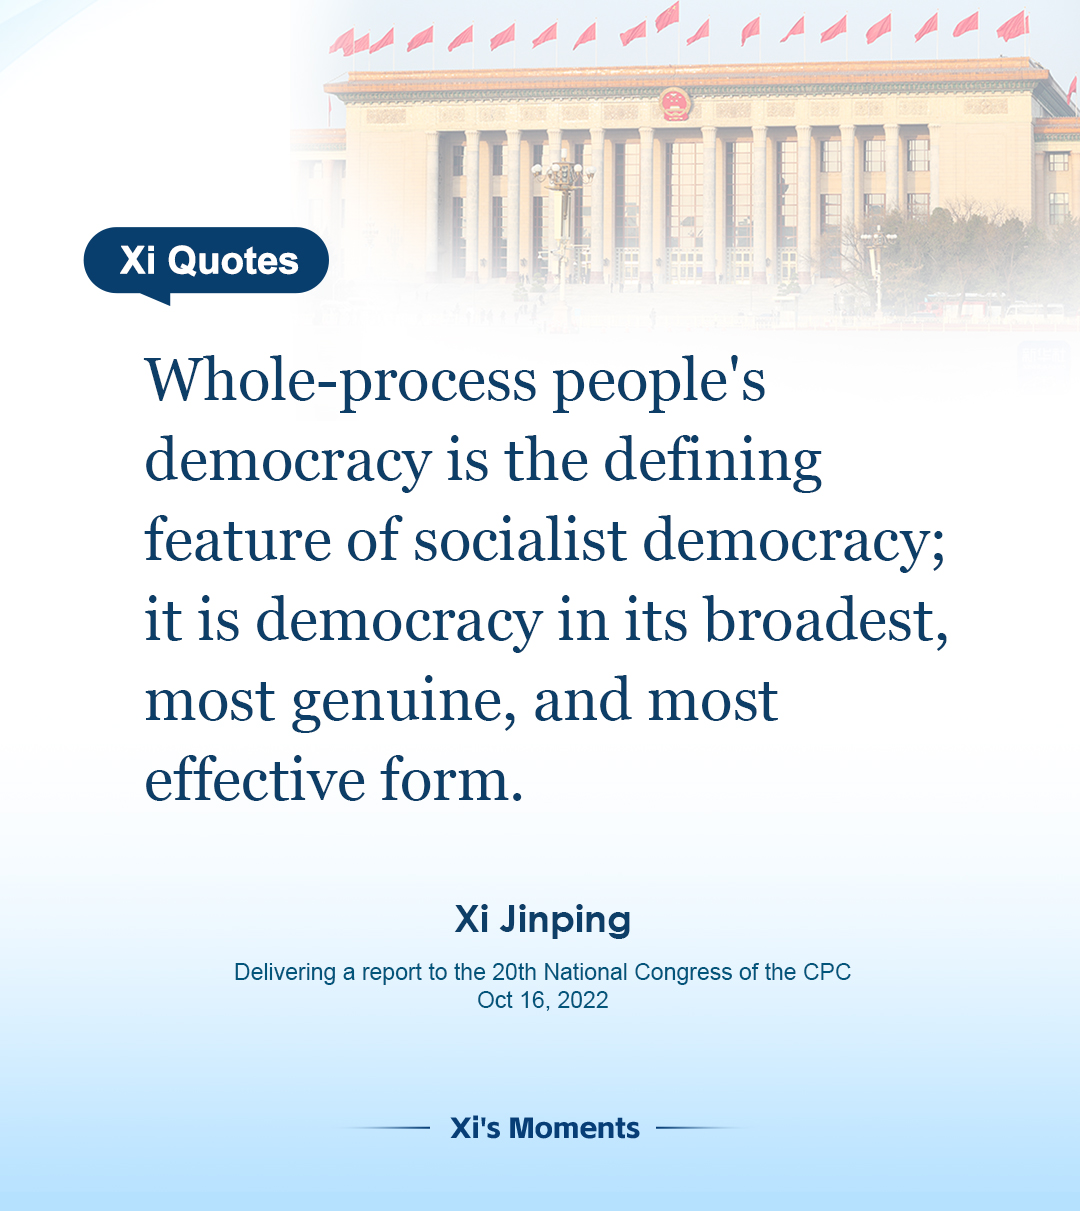 Xi's key remarks on whole-process people's democracy